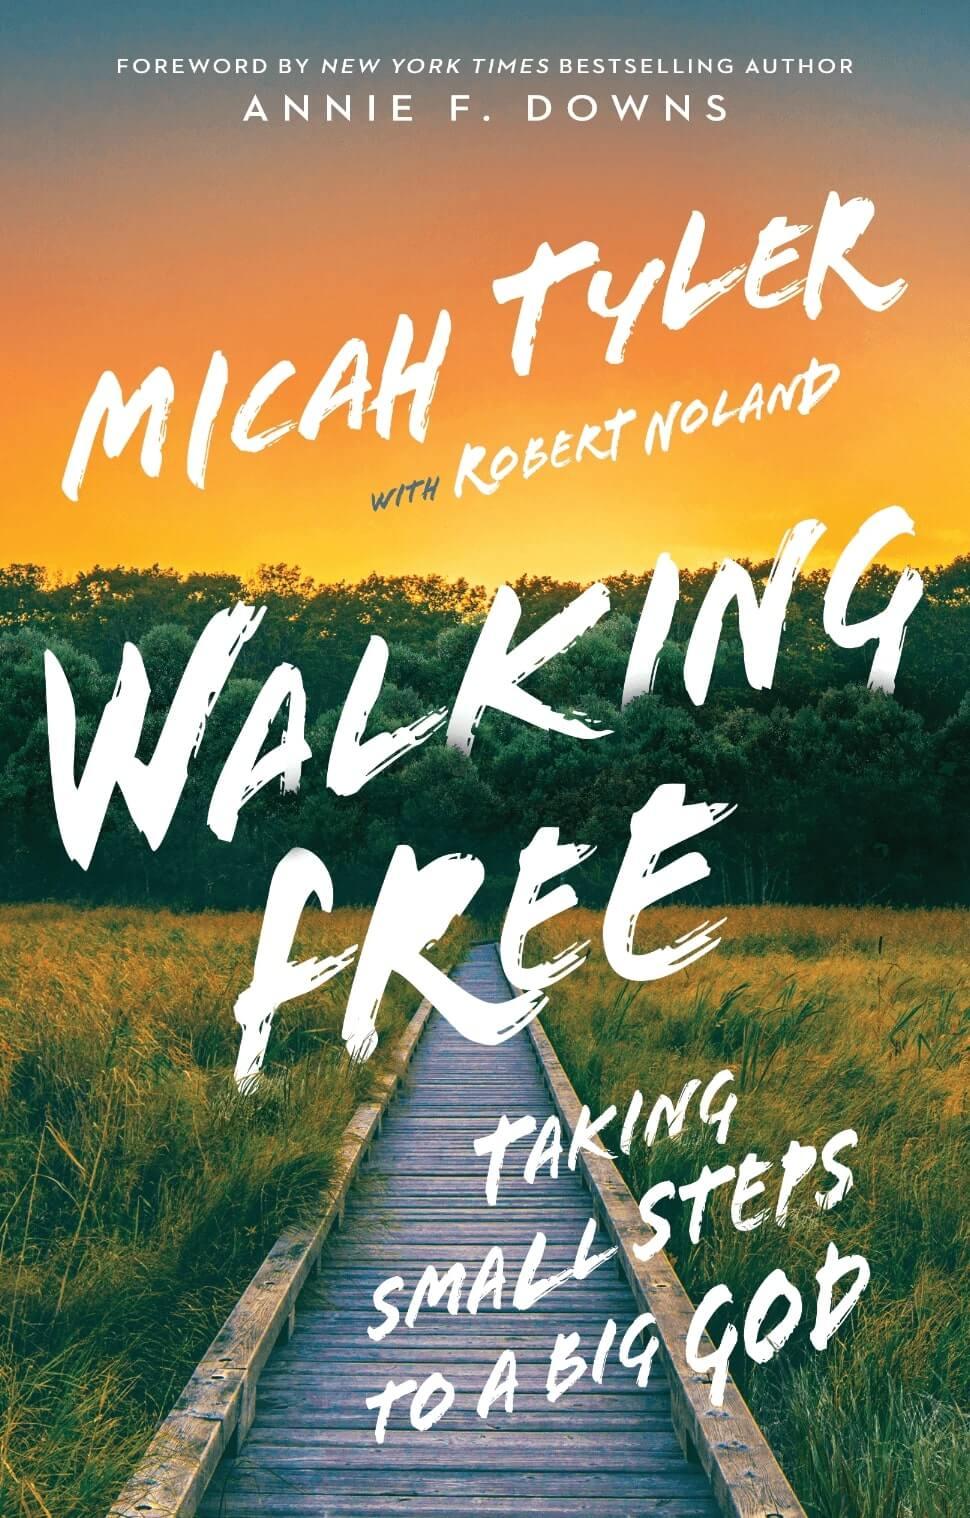 Cover of the book "Walking Free: Taking Small Steps to a Big God"